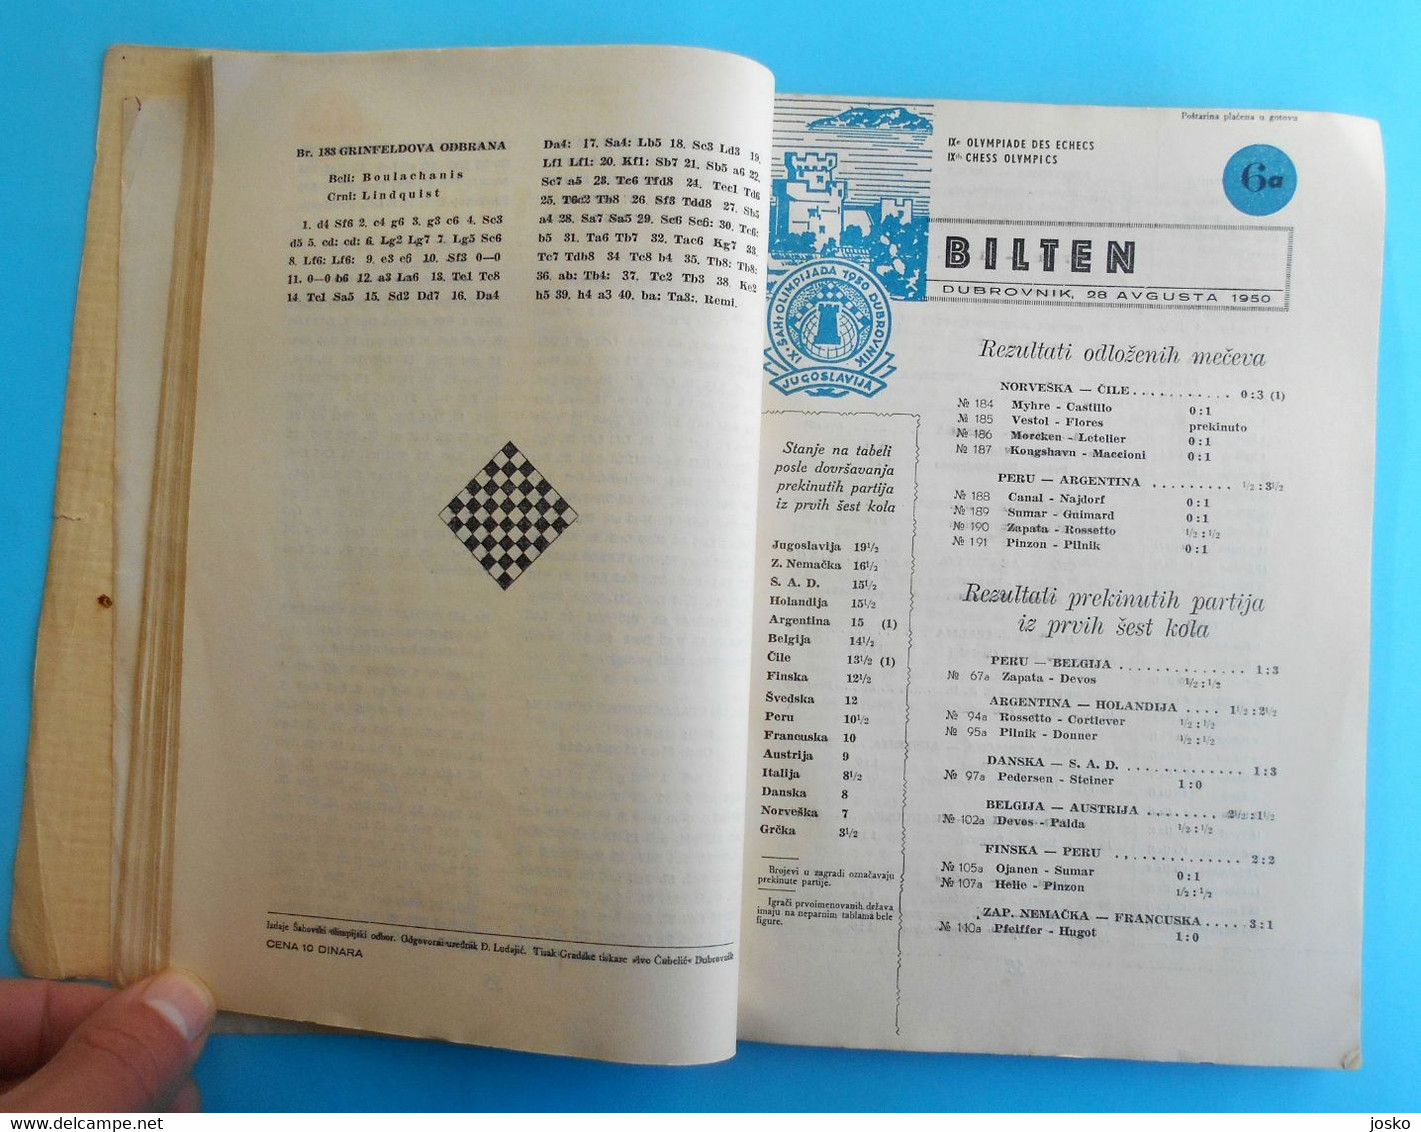 9th CHESS OLYMPIAD 1952 DUBROVNIK complete set of all 20. official newsletters * Olympiade echecs ajedrez schach scacchi